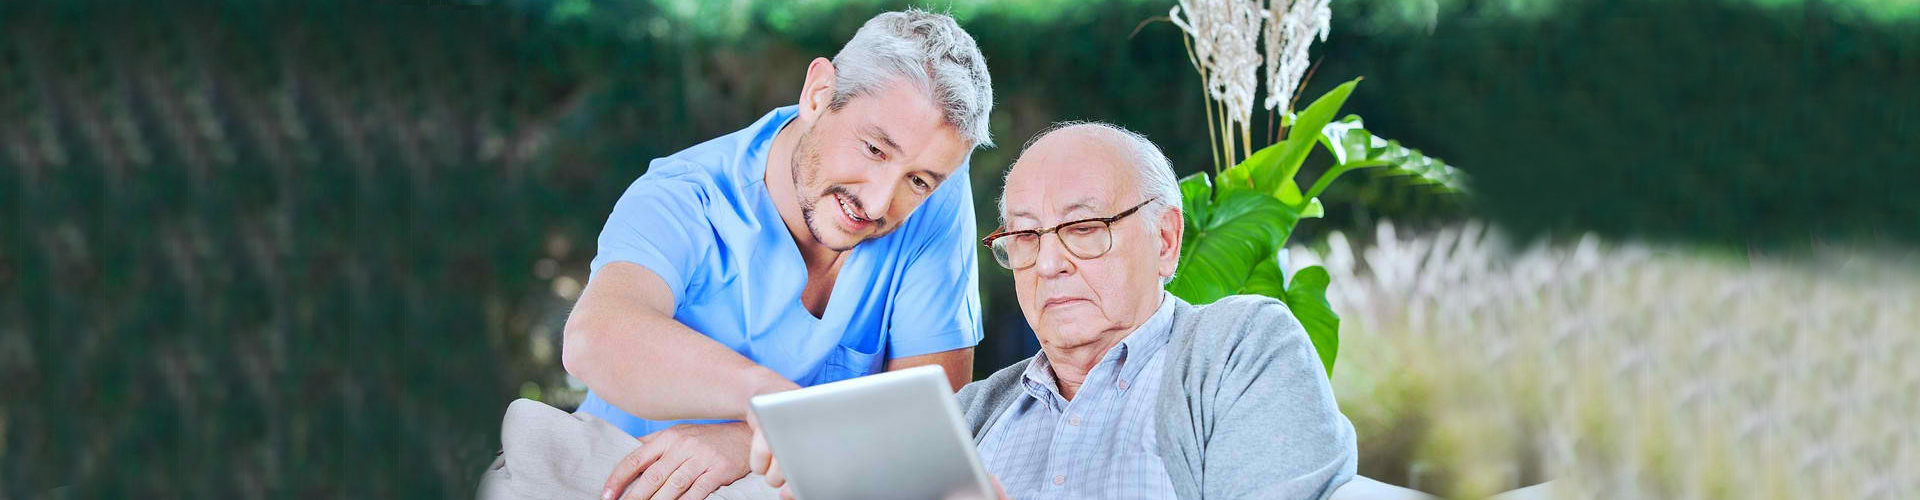 male assisting elderly man with tablet